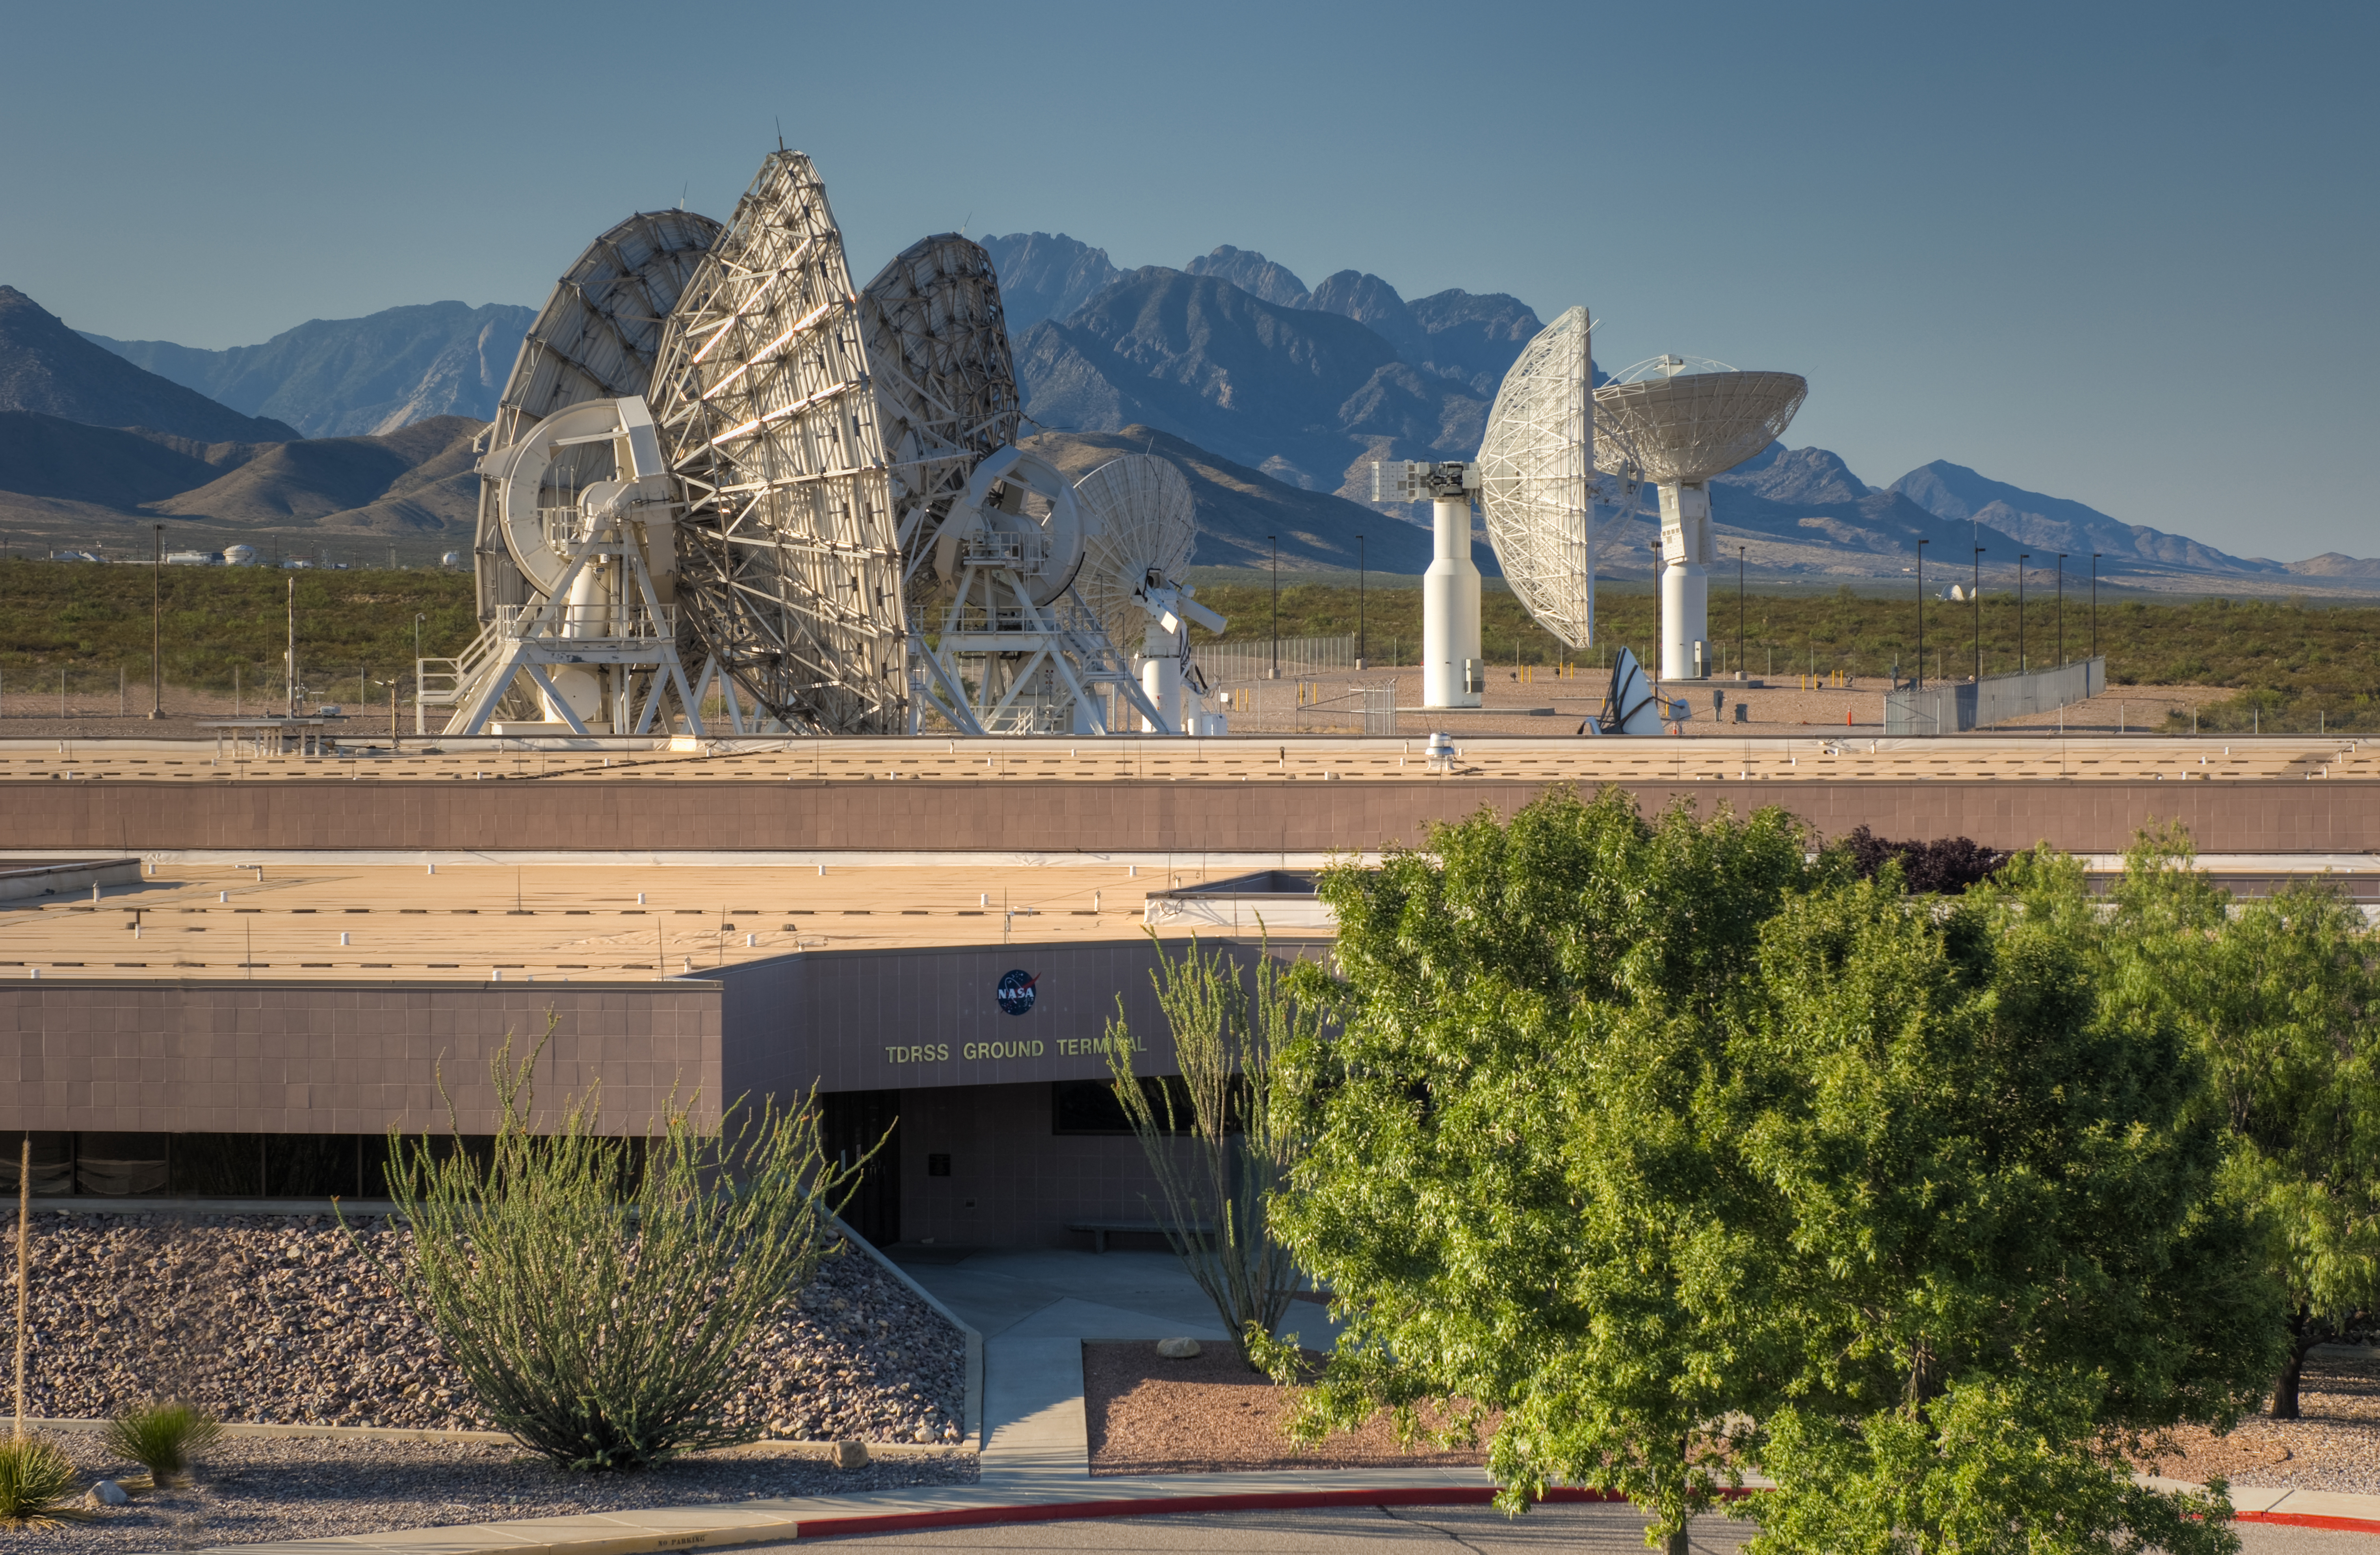 TDRSS ground station with satellite dishes and mountains in the background at WSTF